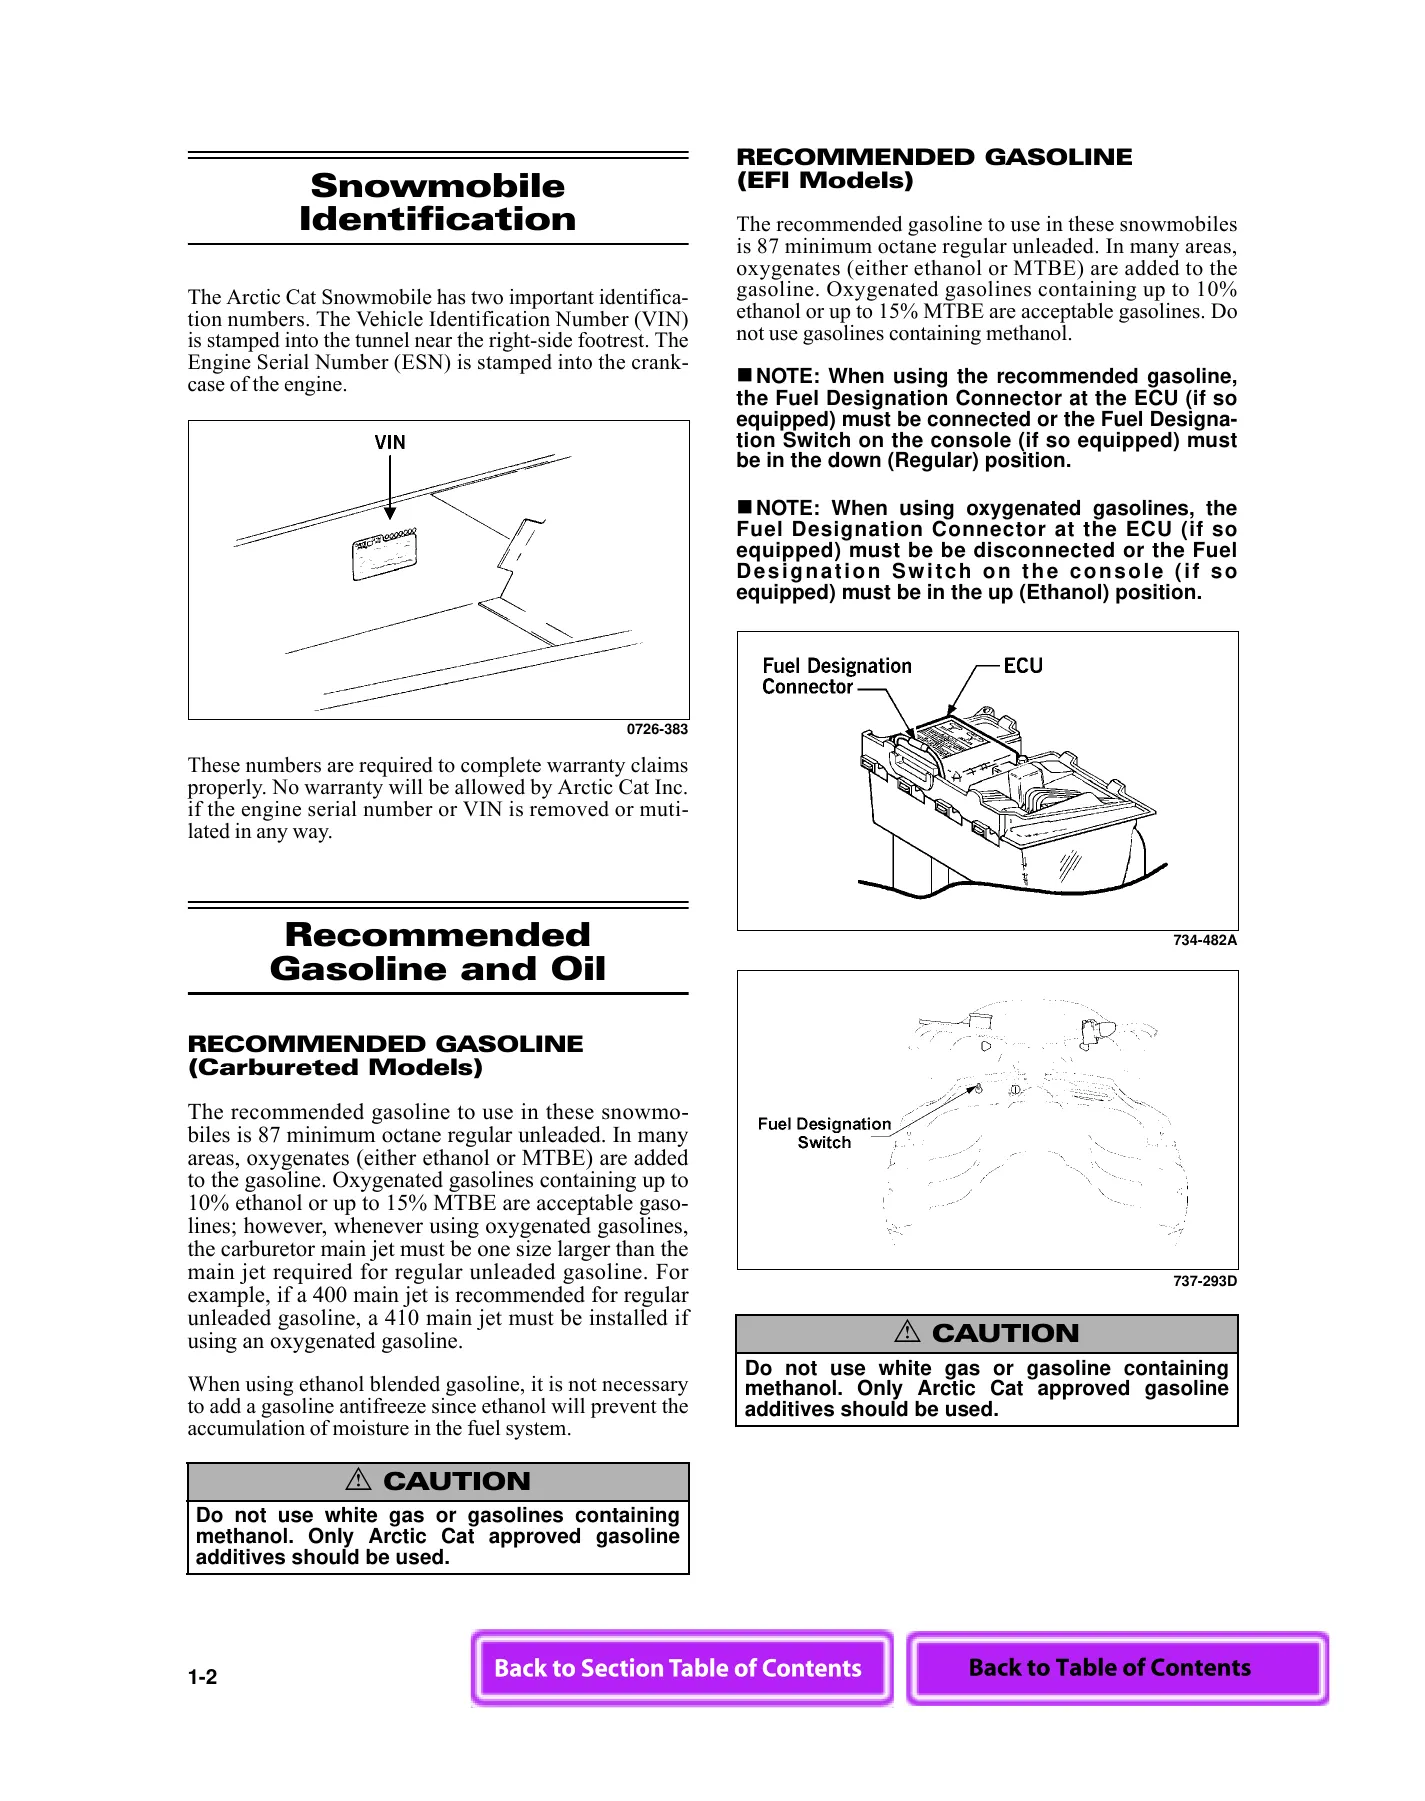 2003 Arctic Cat snowmobile service manual Preview image 2